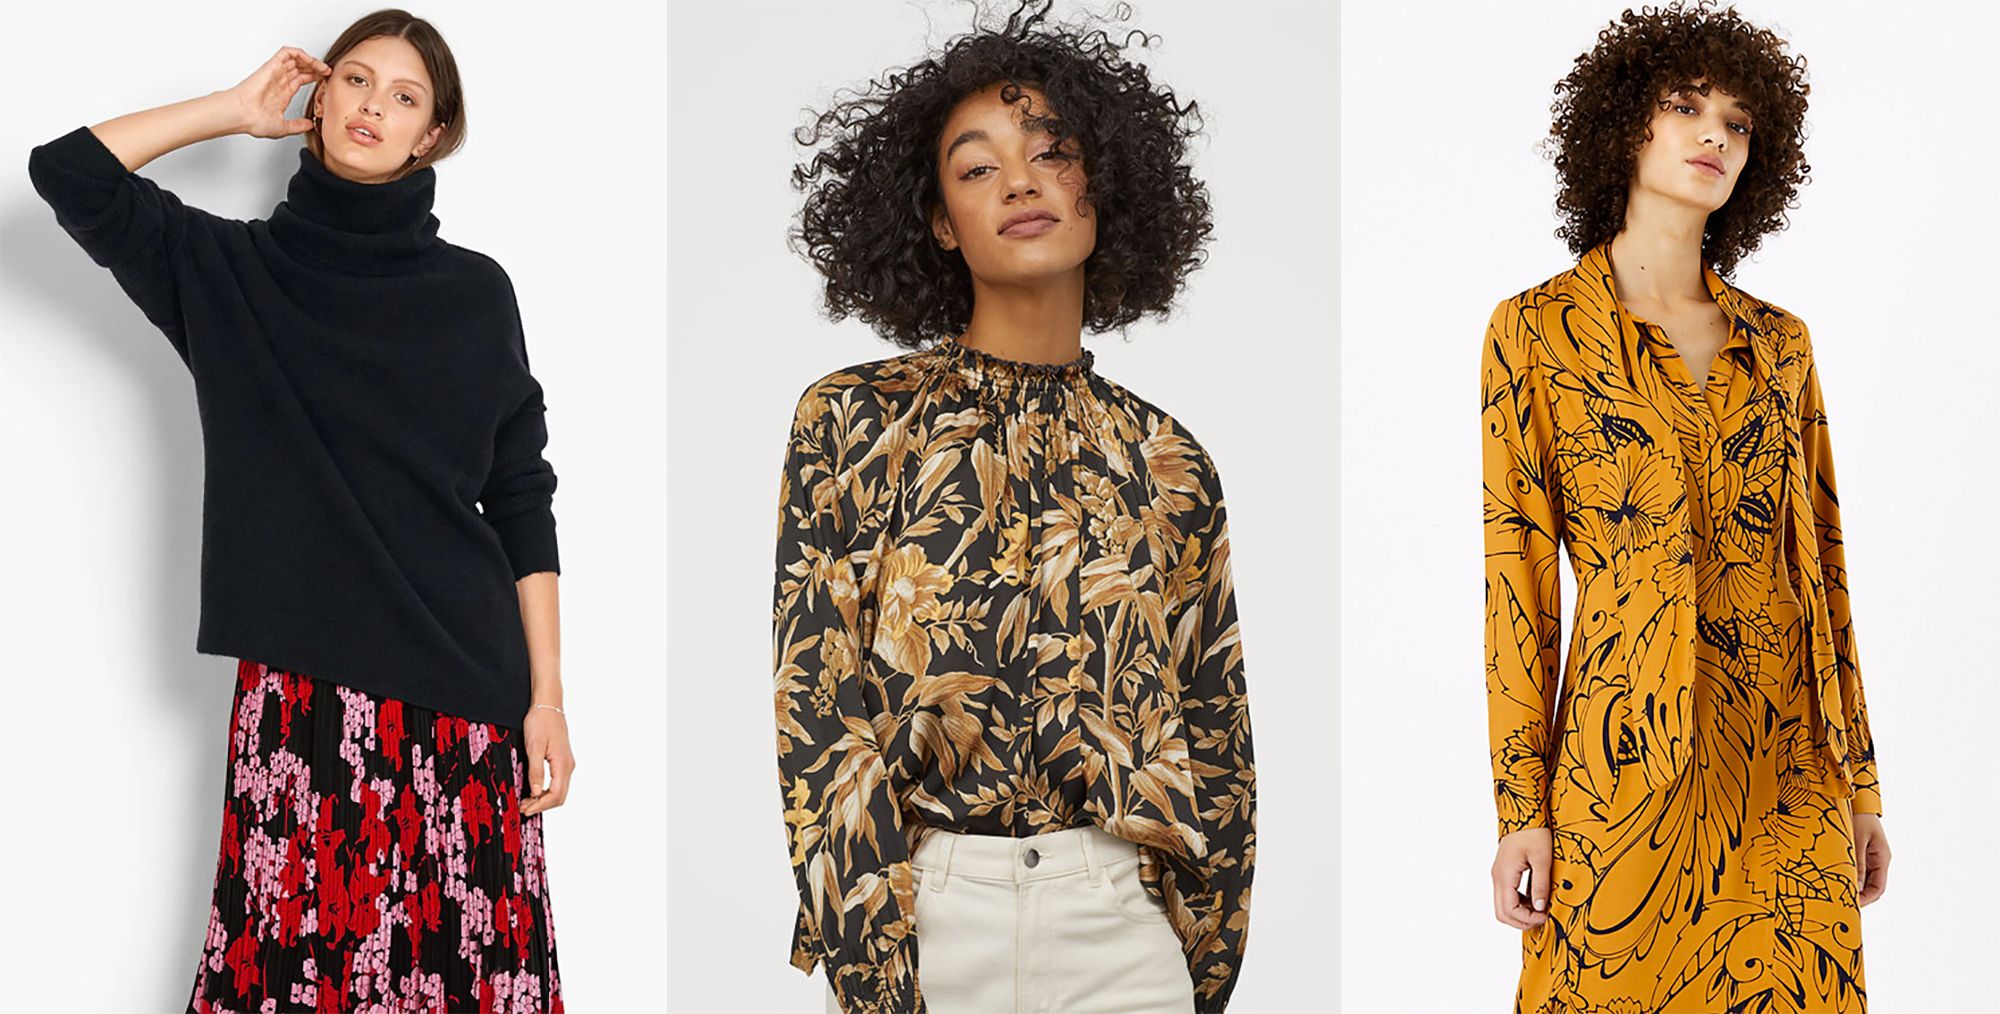 Floral fashion on the high street that will brighten up cold winter days